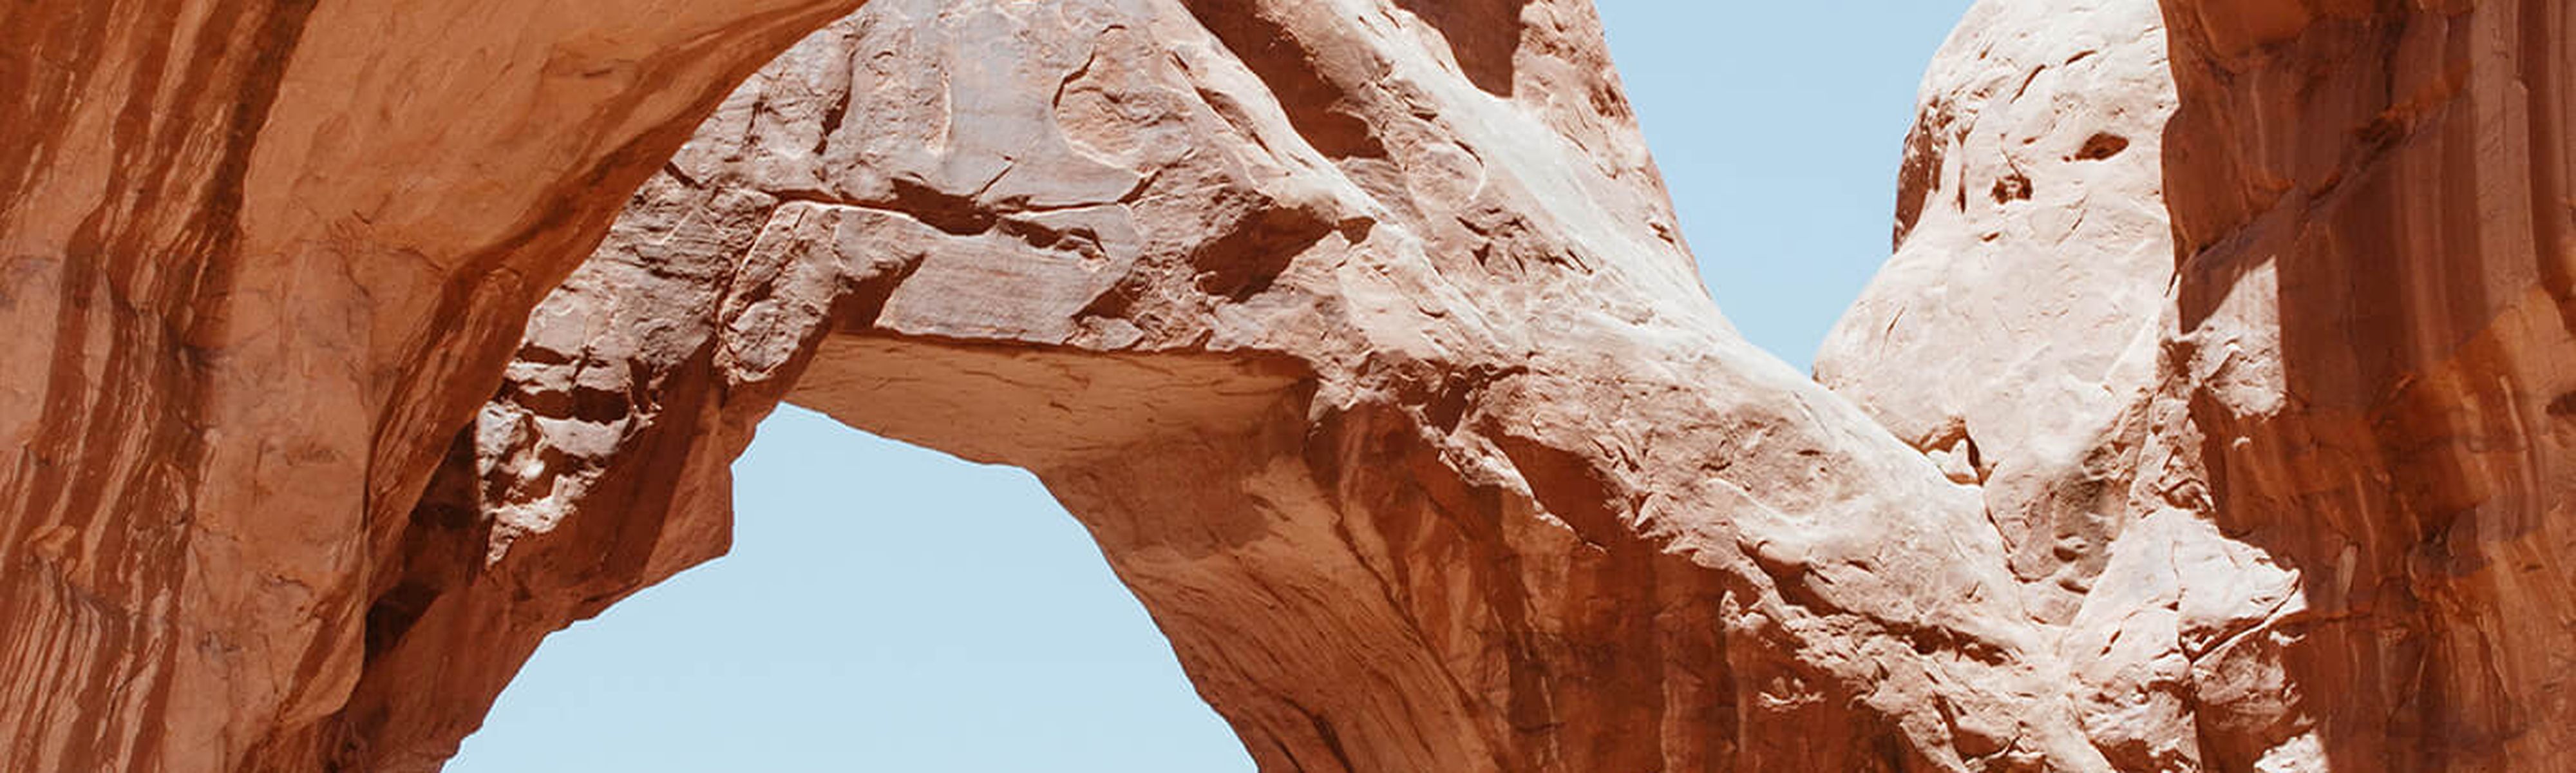 person standing on under double arch in moab utah